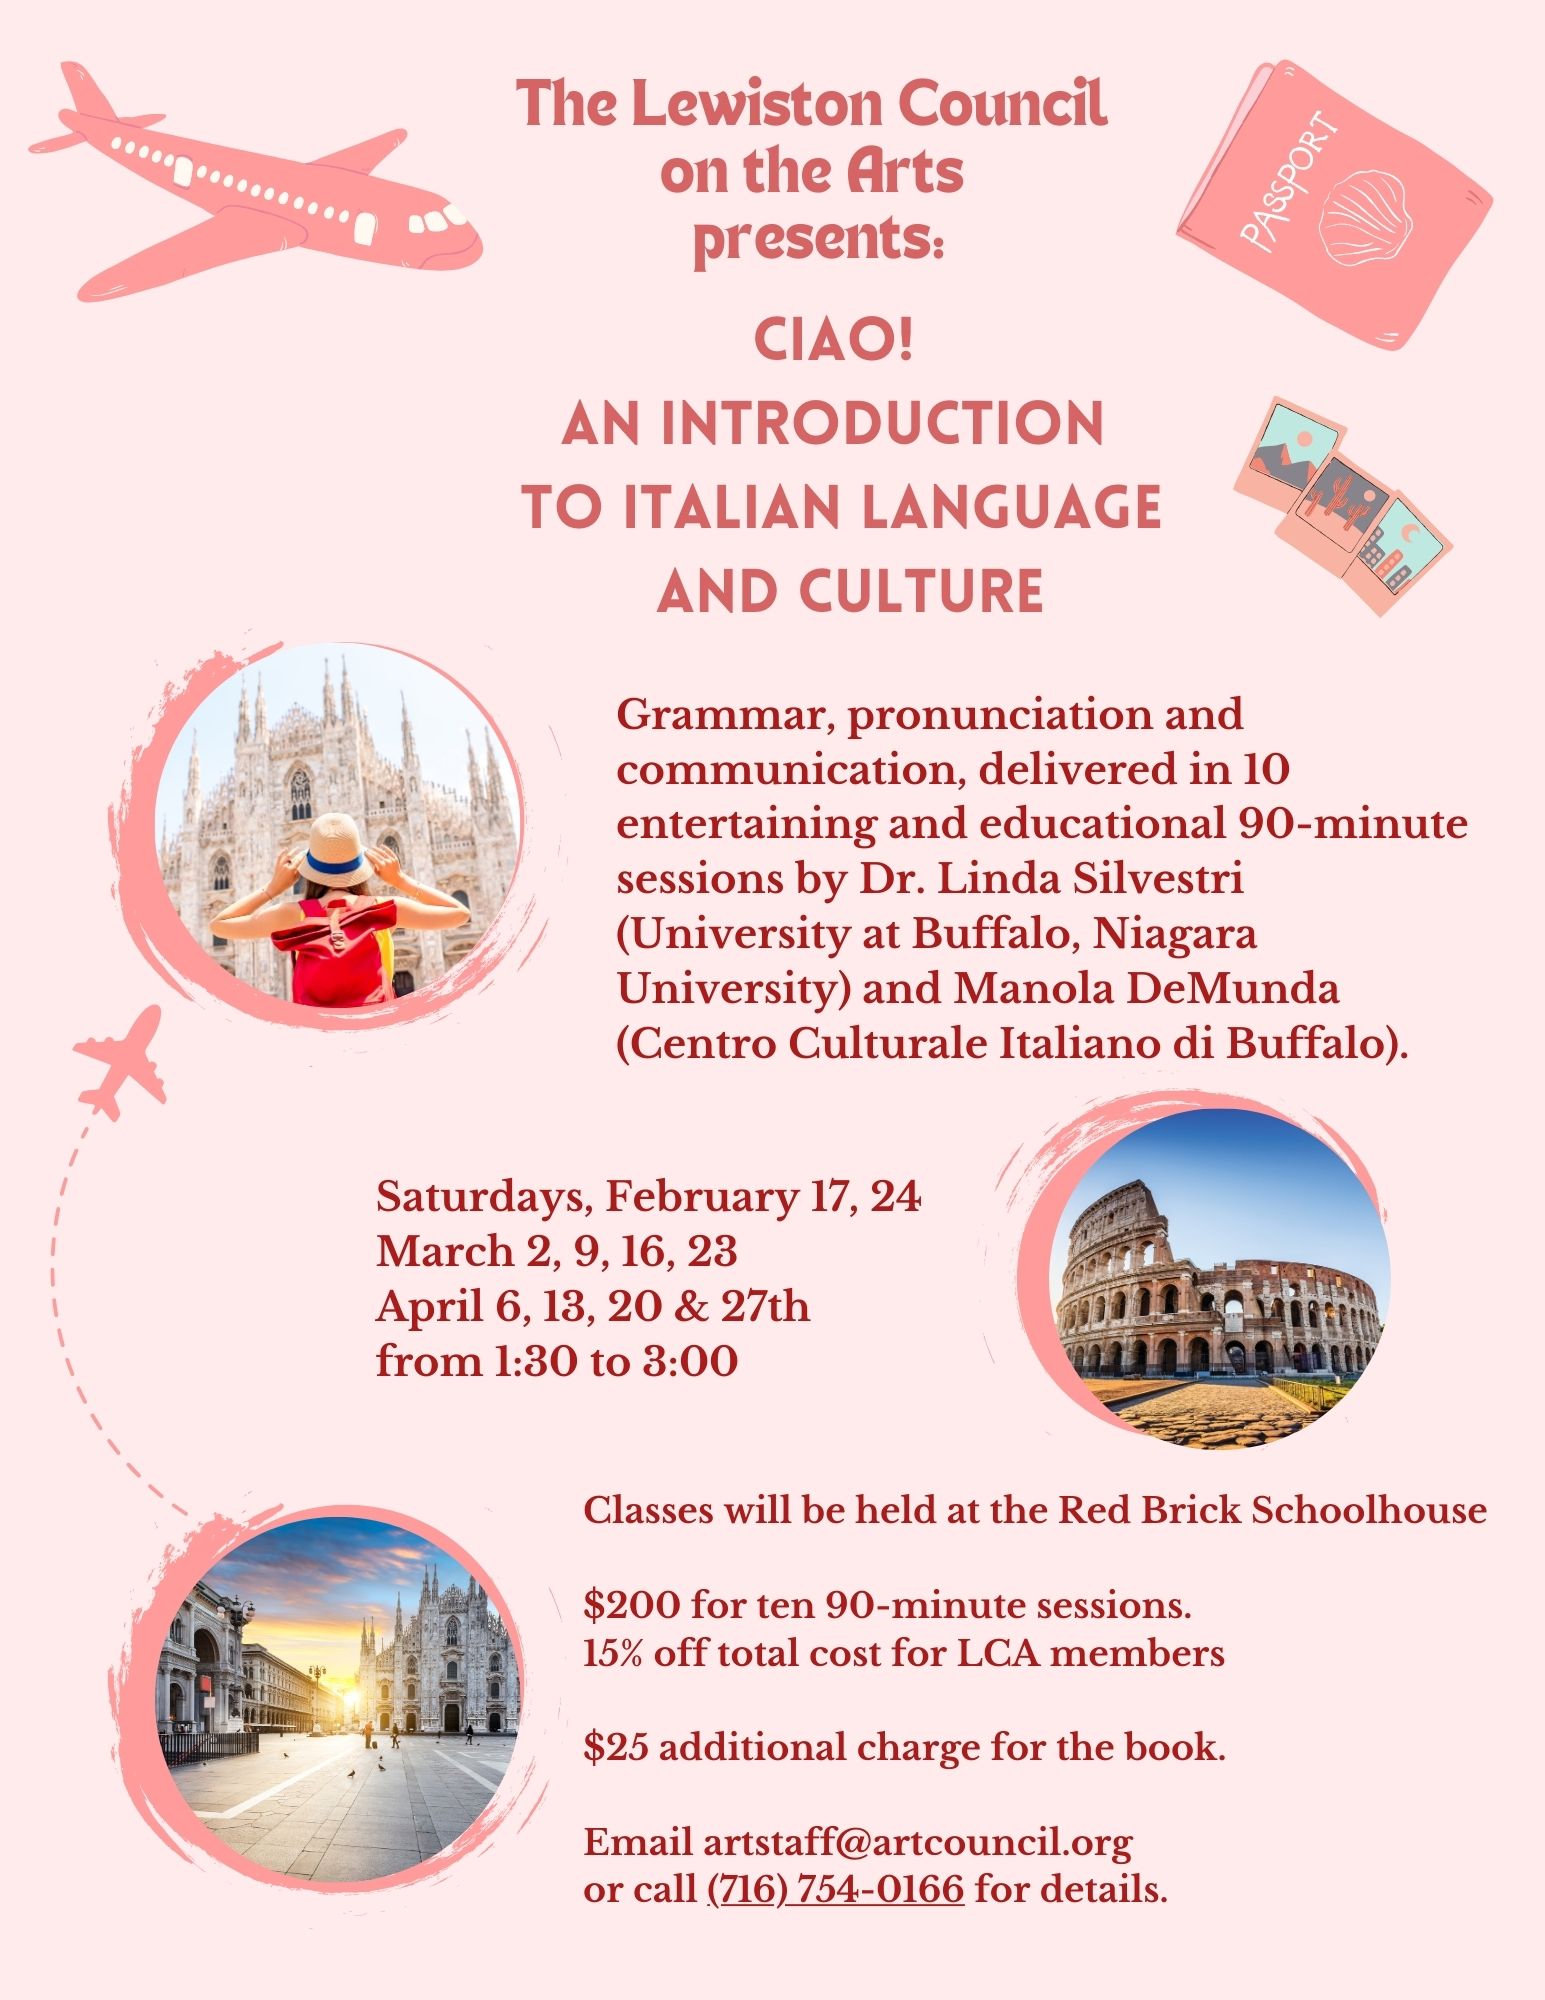 Ciao! An Introduction to Italian Language and Culture Image